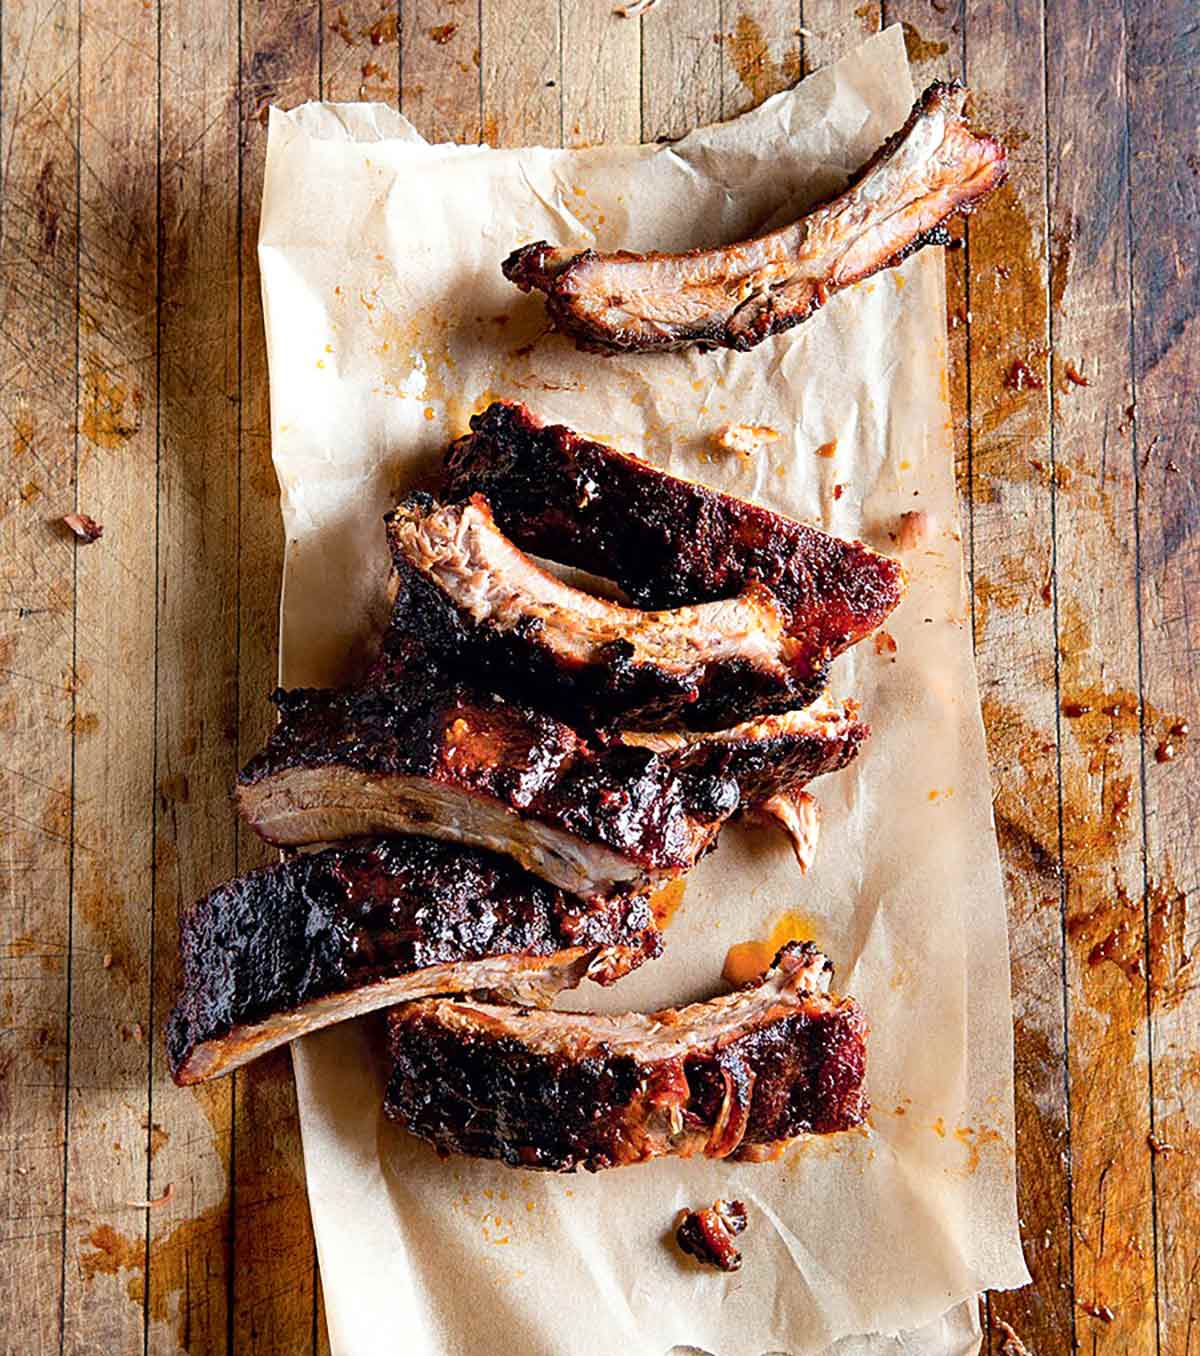 Seven spice-rubbed baby back ribs on a piece of parchment on a wooden surface.